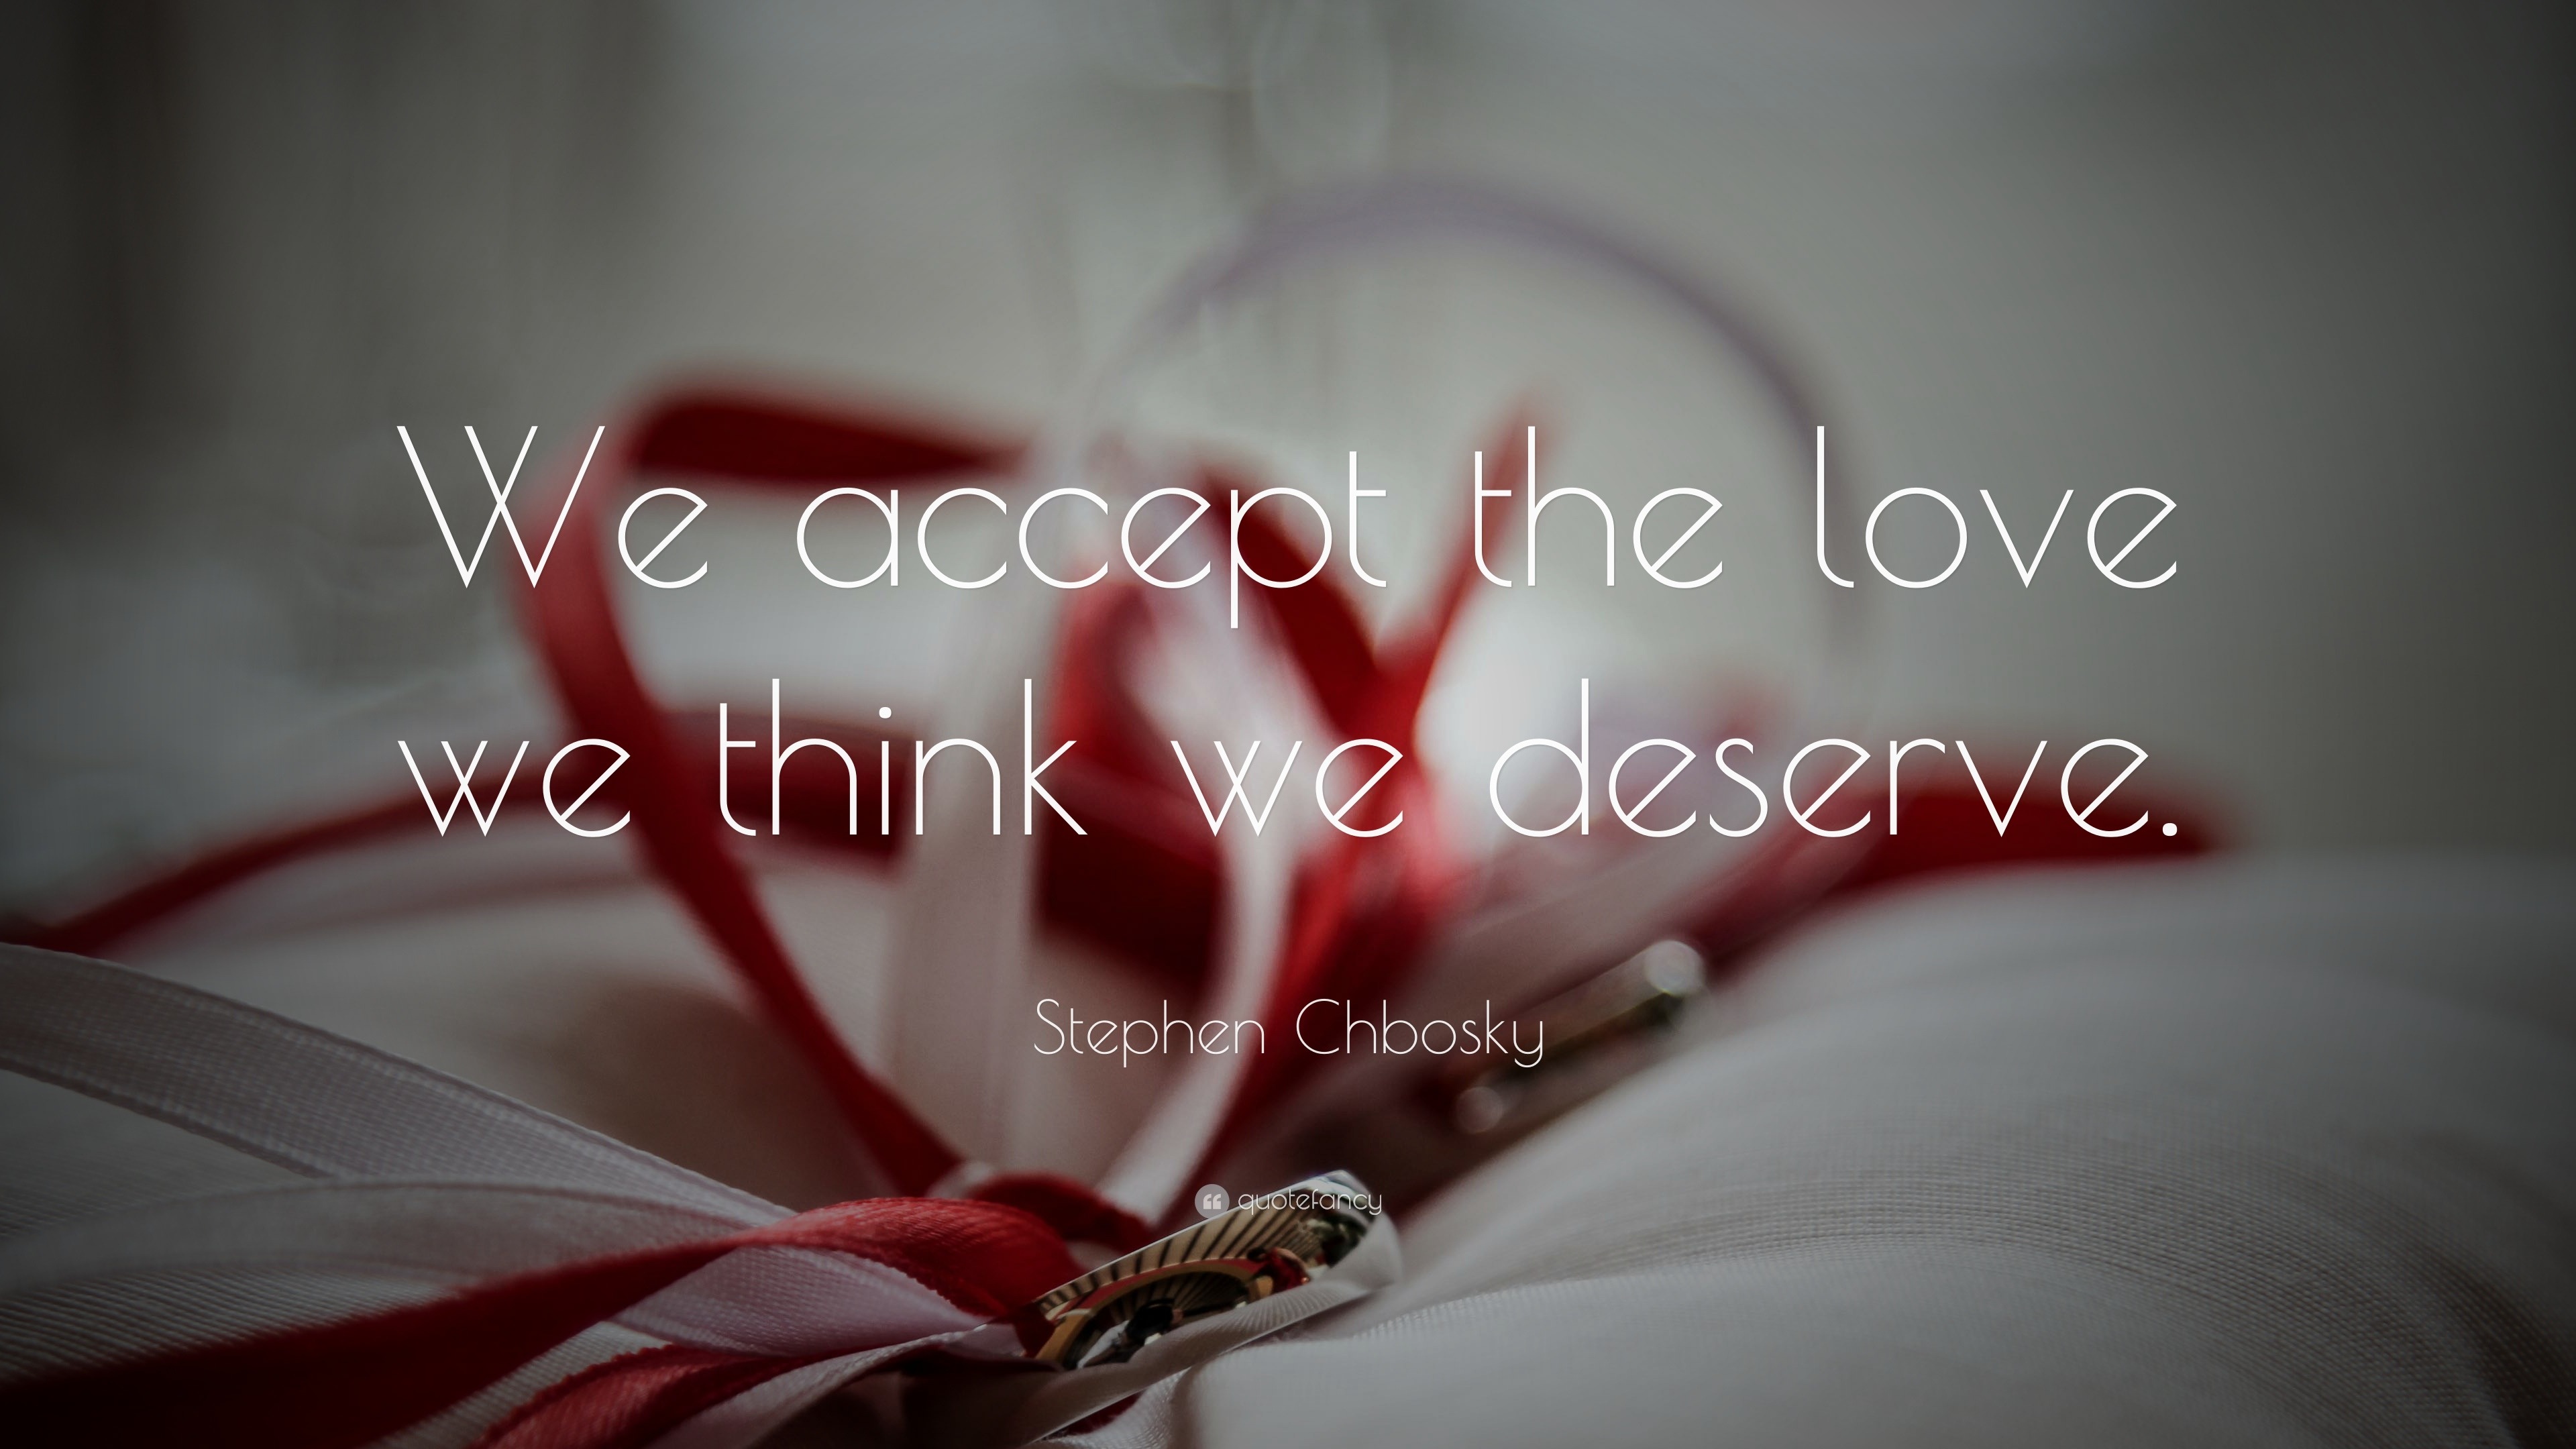 Stephen Chbosky Quote: “We accept the love we think we deserve.” (19